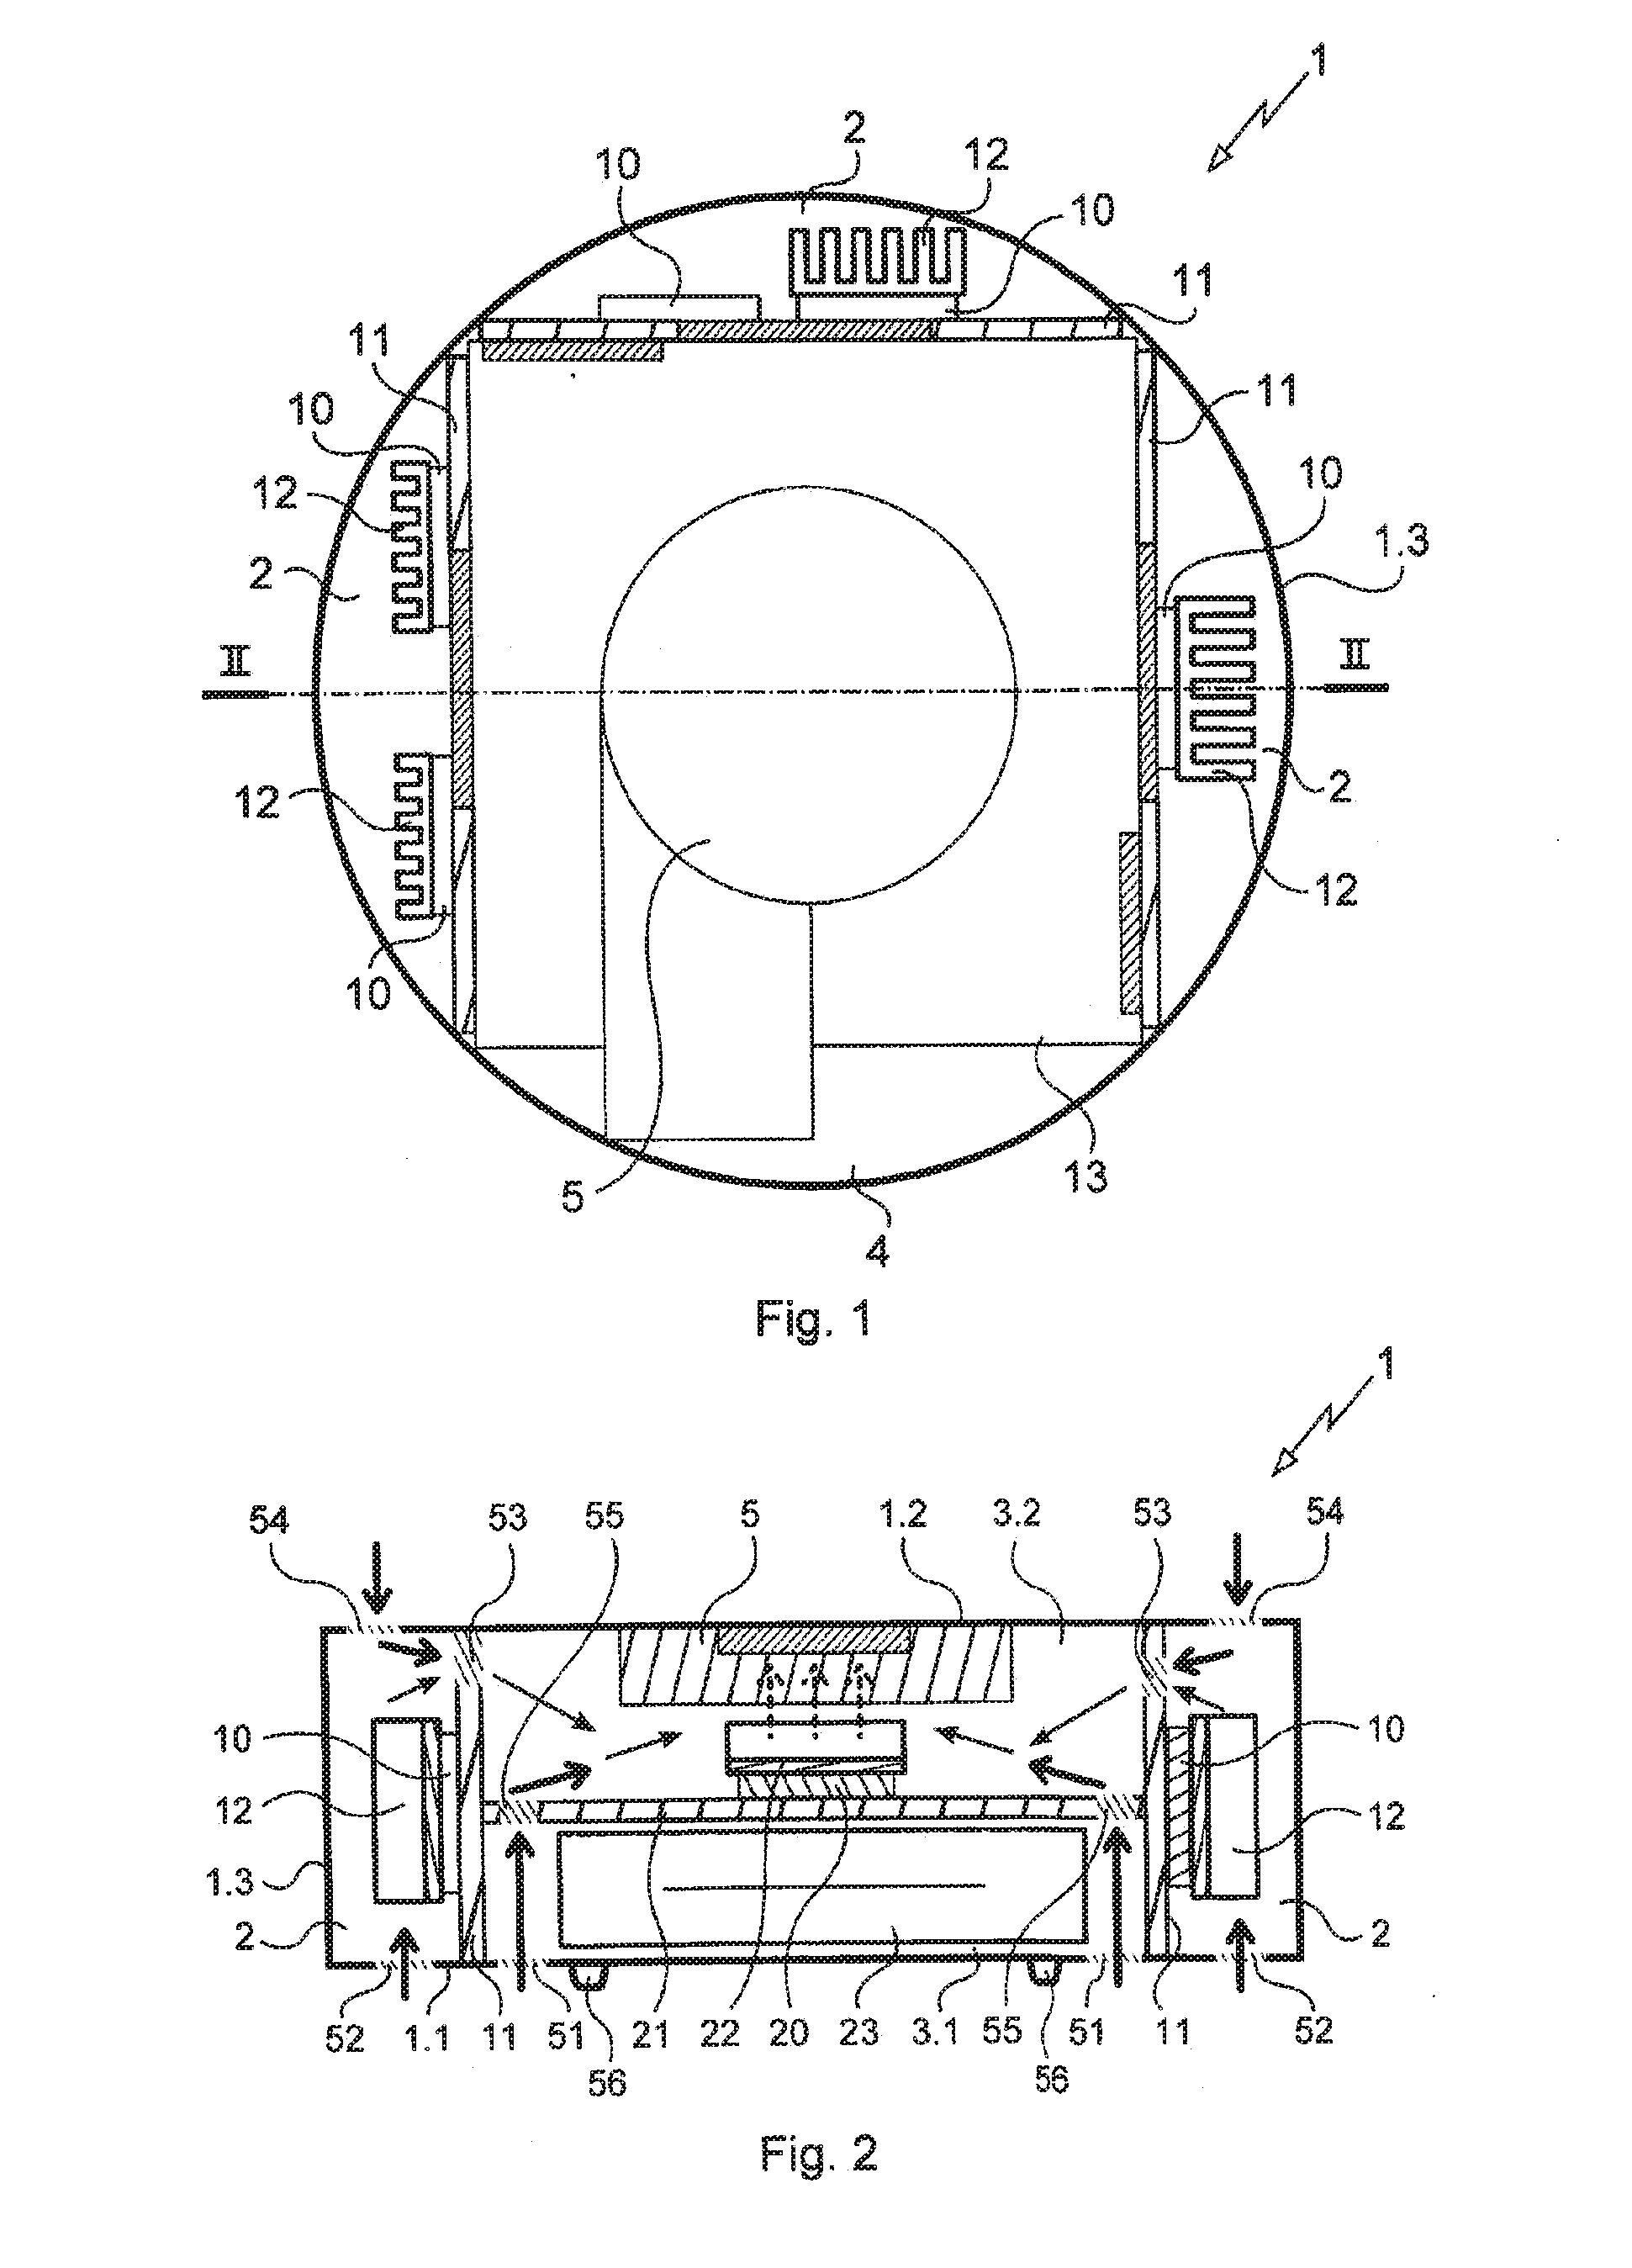 Electronic equipment with double cooling